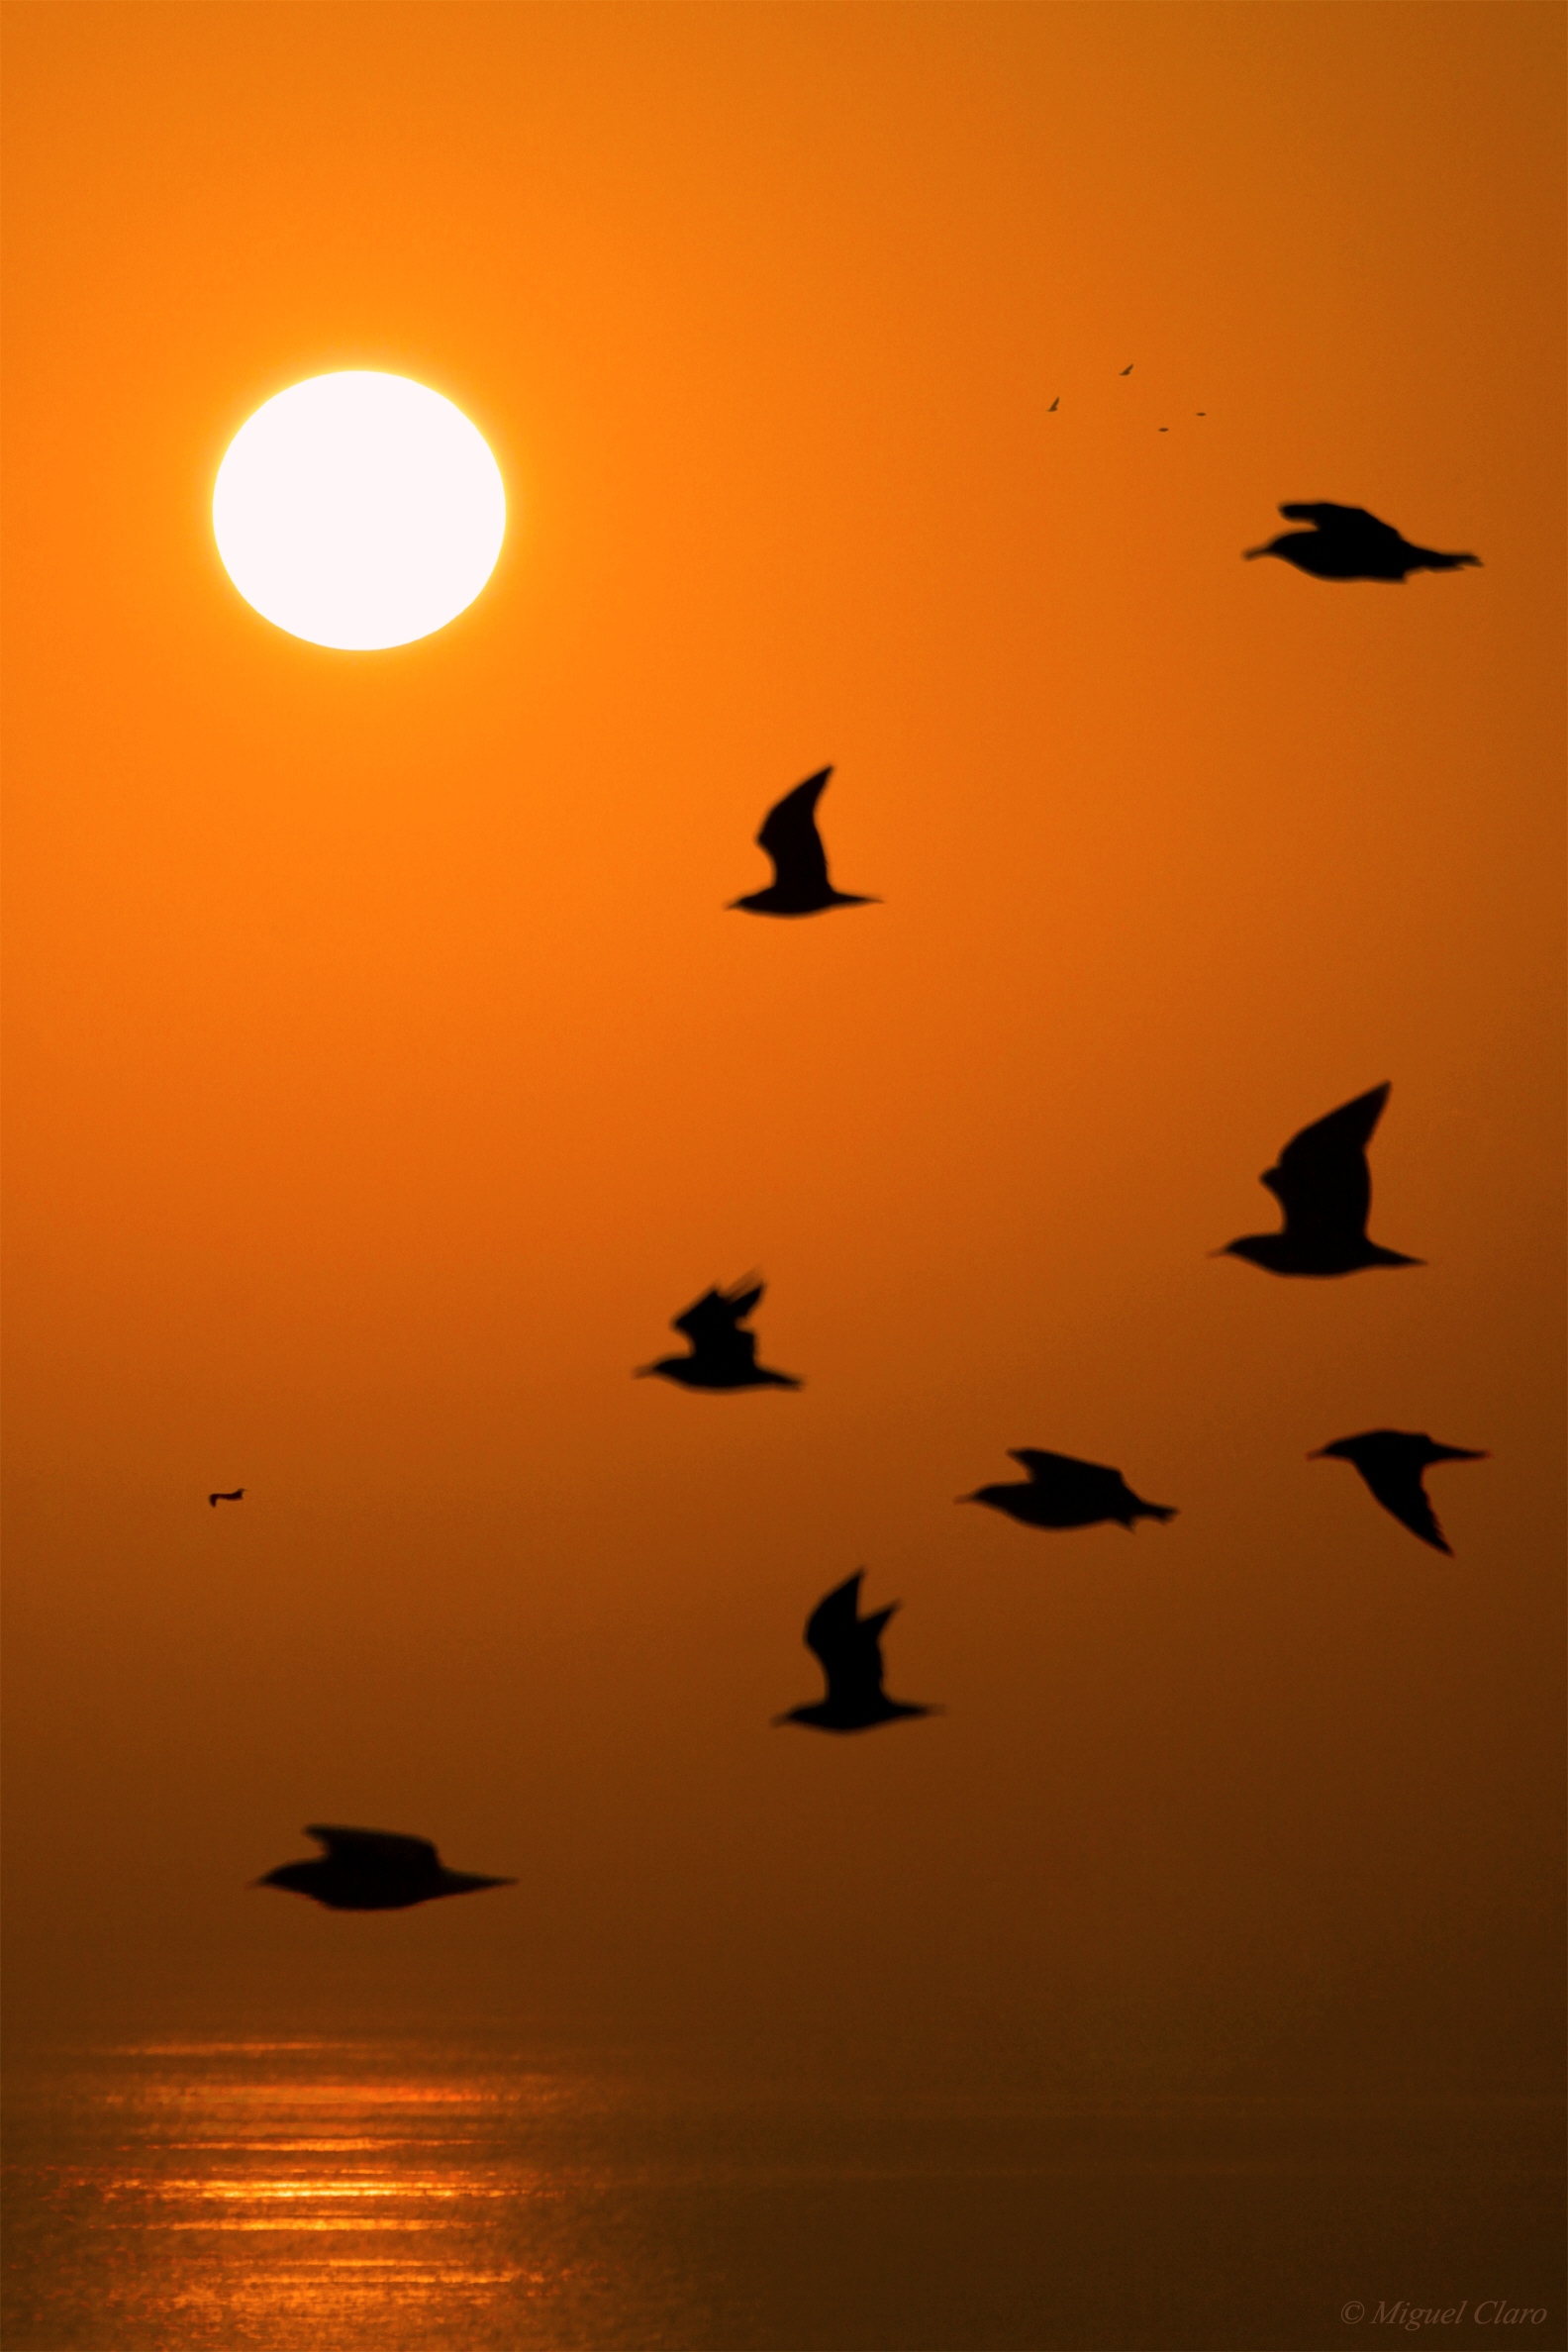 The Sunset Birds @ Astrophotography by Miguel Claro | Official ...